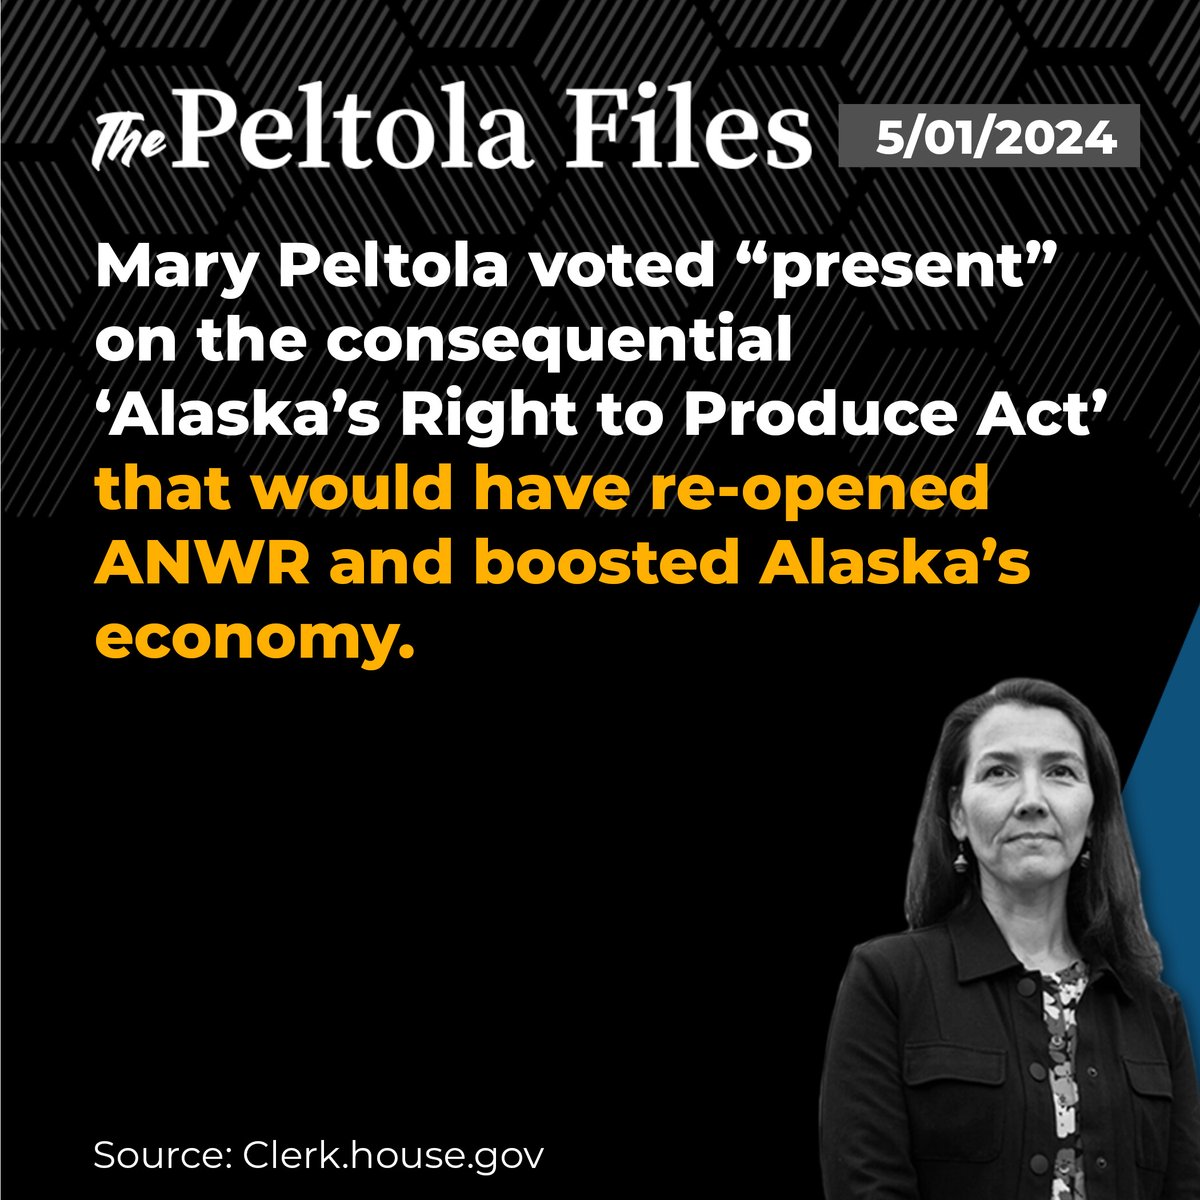 We need to take back our lone House seat this November! Alaska needs a champion in Congress, not someone who votes 'present' when our state is on the line. Get involved & help us retire Mary Peltola. Learn more: alaskagop.net/peltola-files/ Volunteer: alaskagop.net/volunteer/ 📷